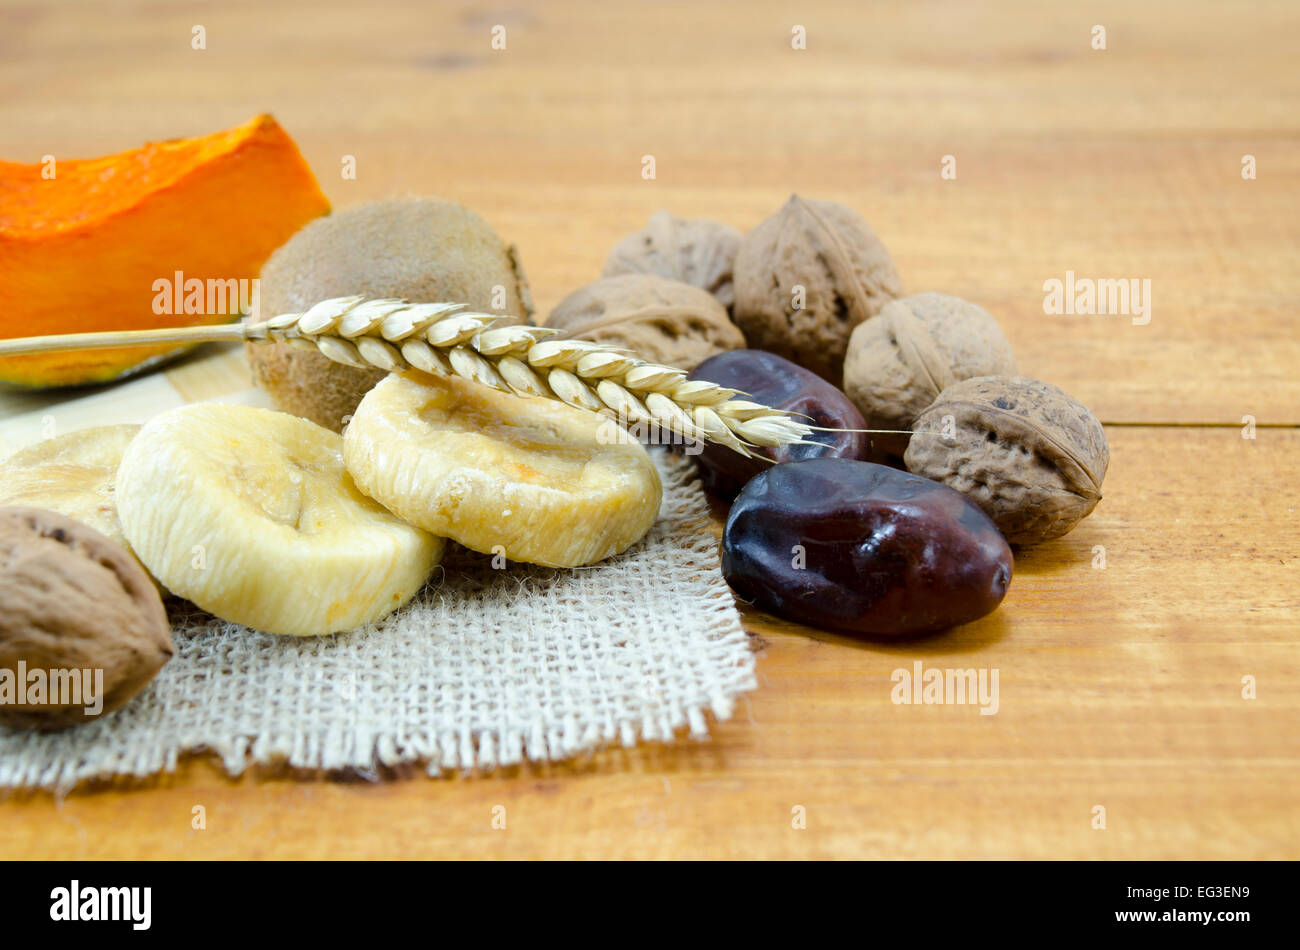 Dried figs, plums, pumpkins with walnuts and kiwis on a wooden table Stock Photo